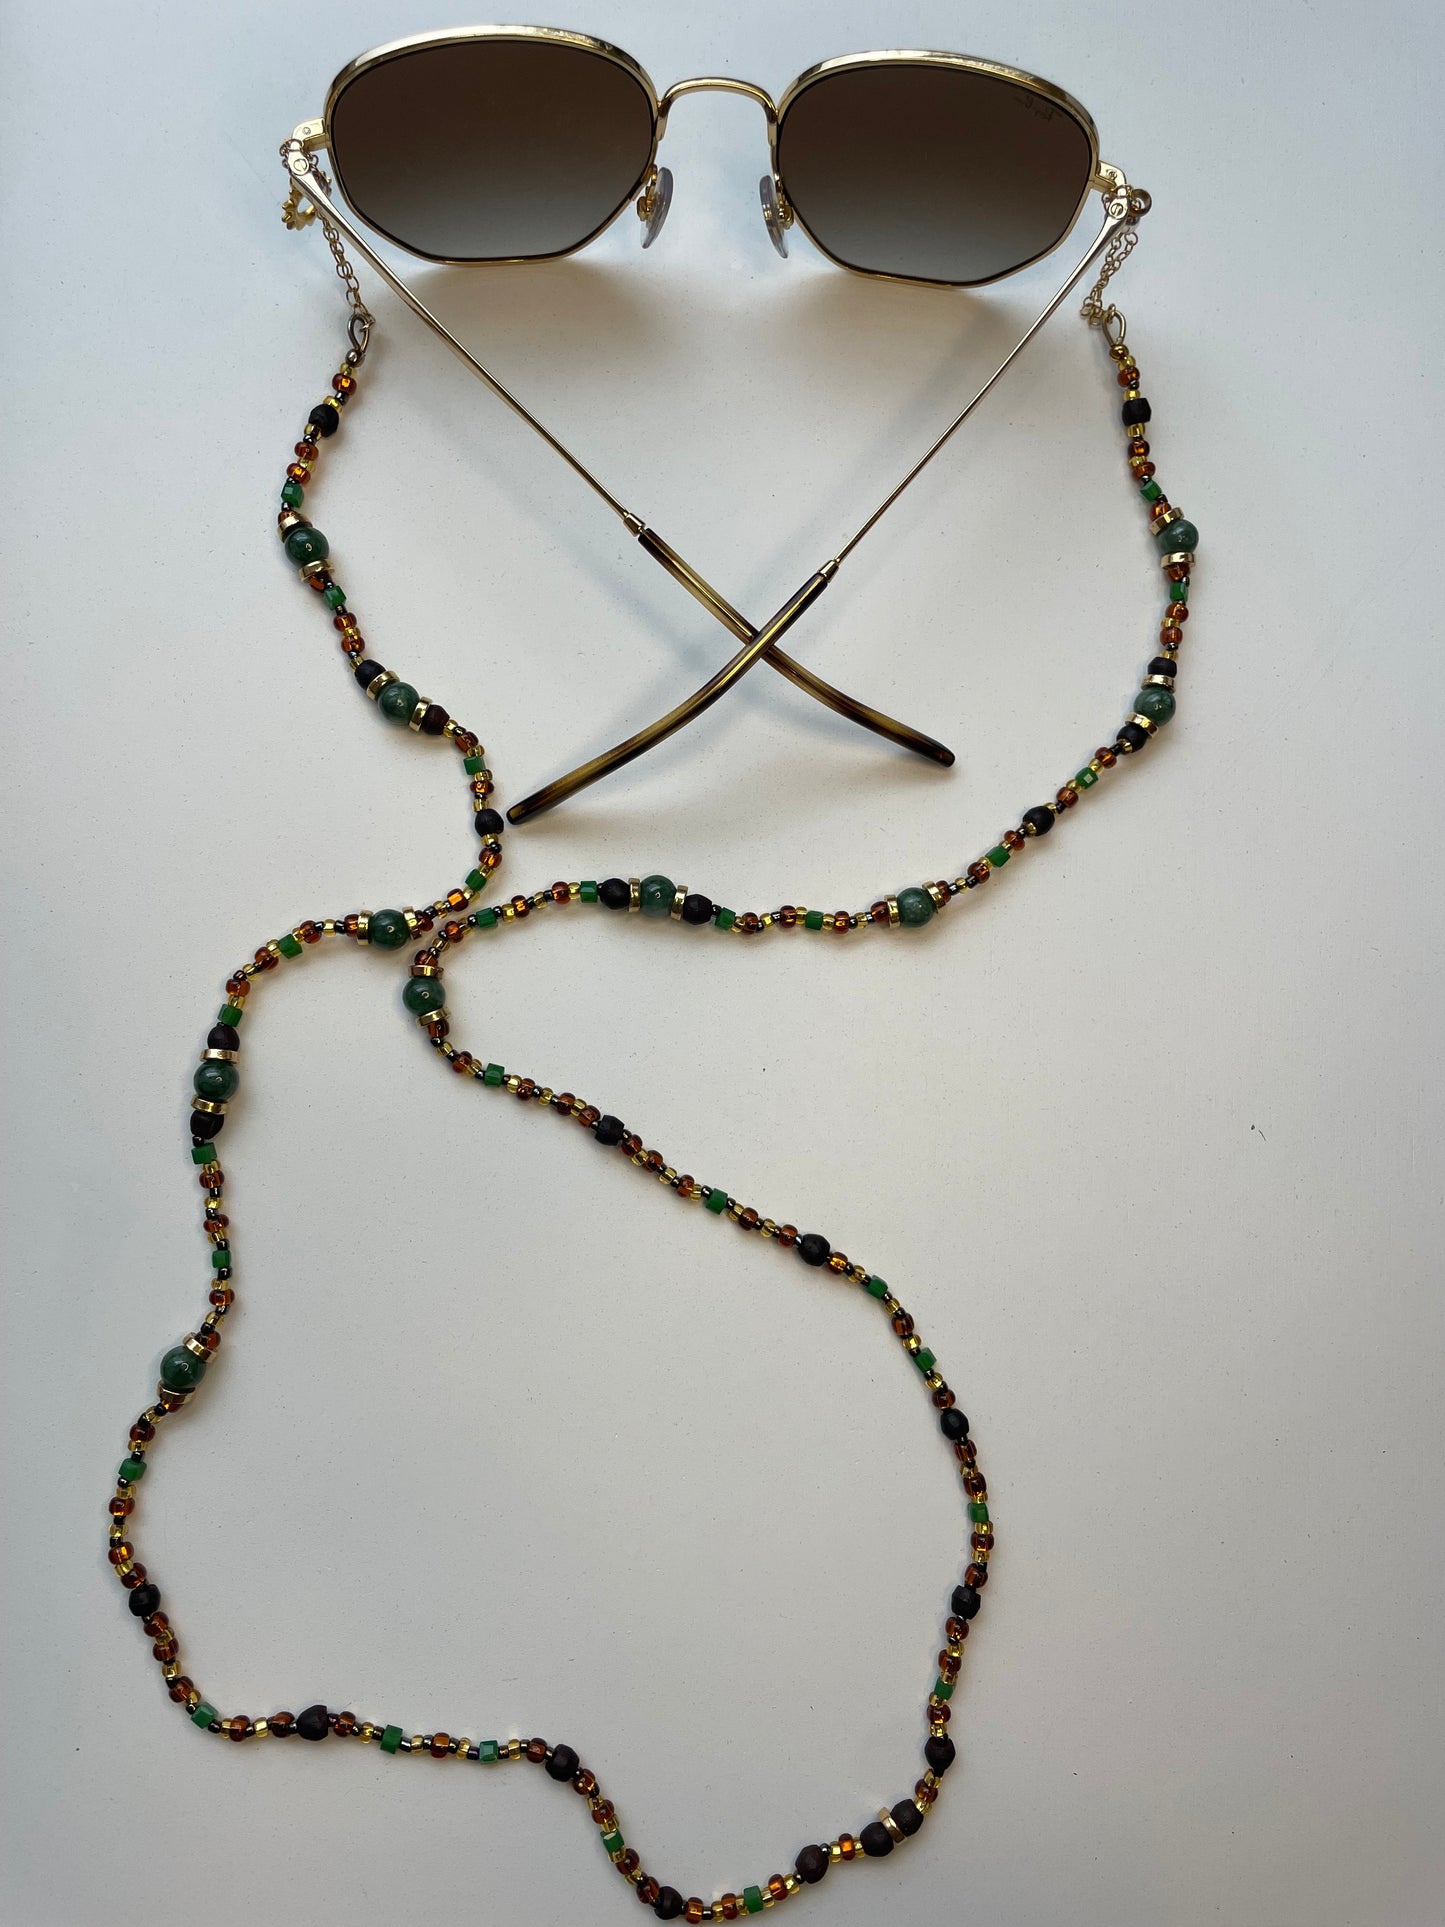 Green Eyed Lady Adaptable Accessory Chain